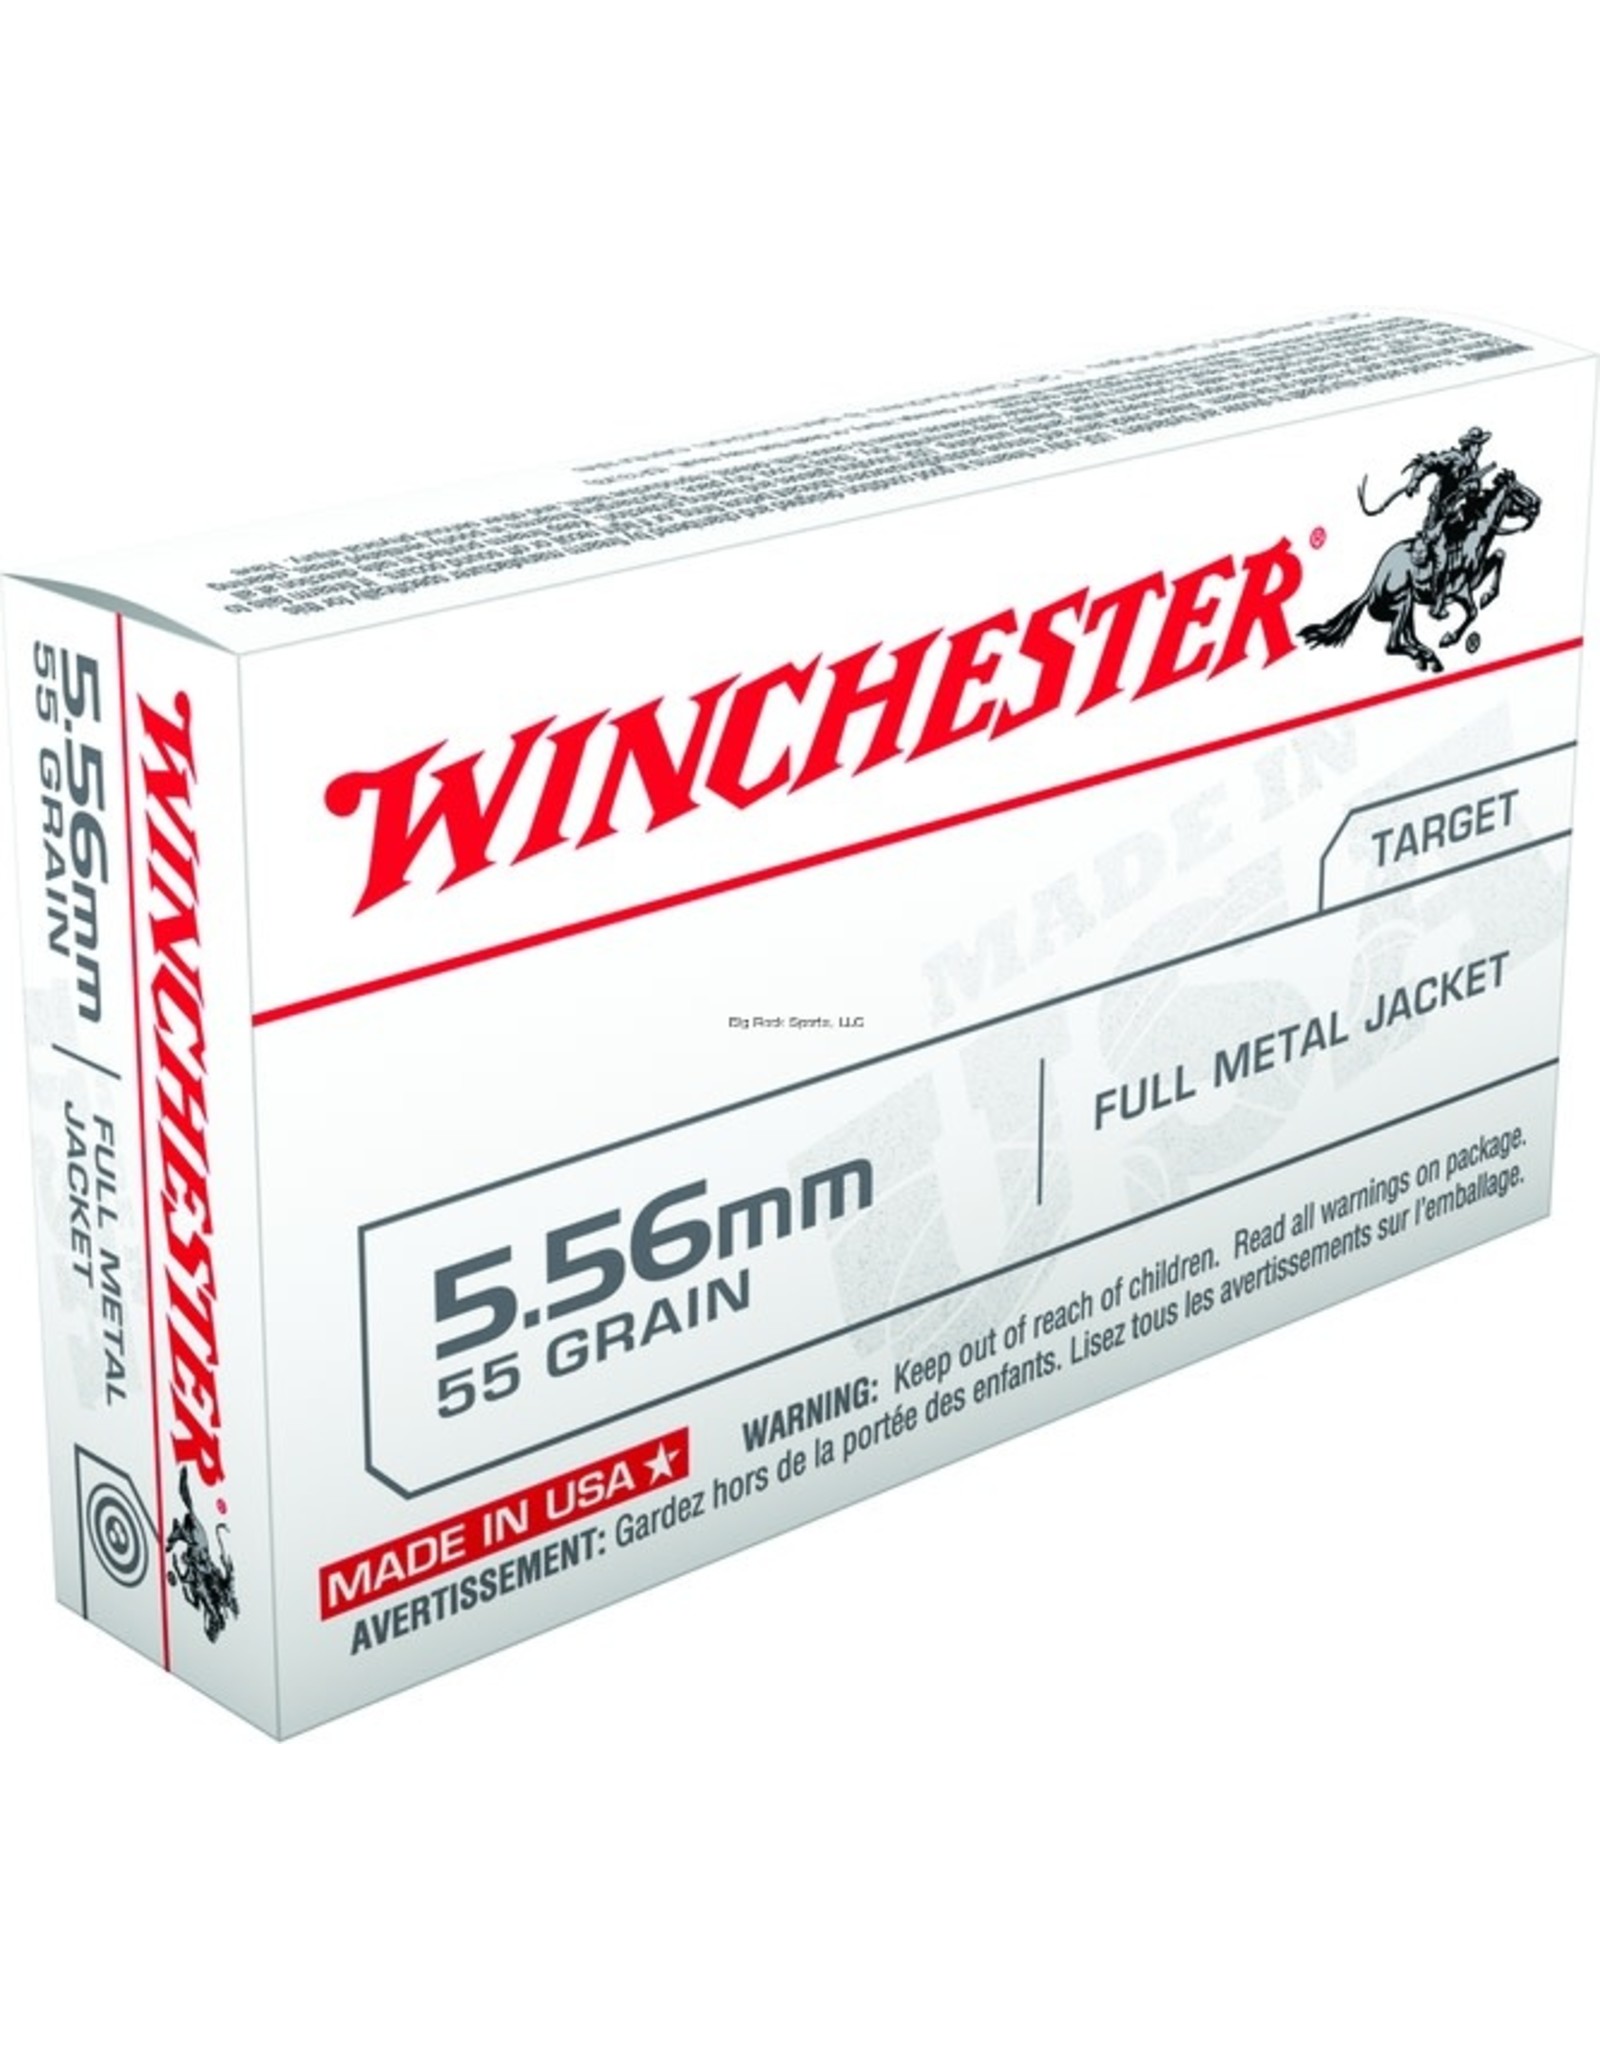 Winchester Winchester WM193K Best Value USA LC Rifle Ammo 5.56 NATO, FMJ, M193, 55 Gr, 3180 fps, 20 Rnd, Boxed